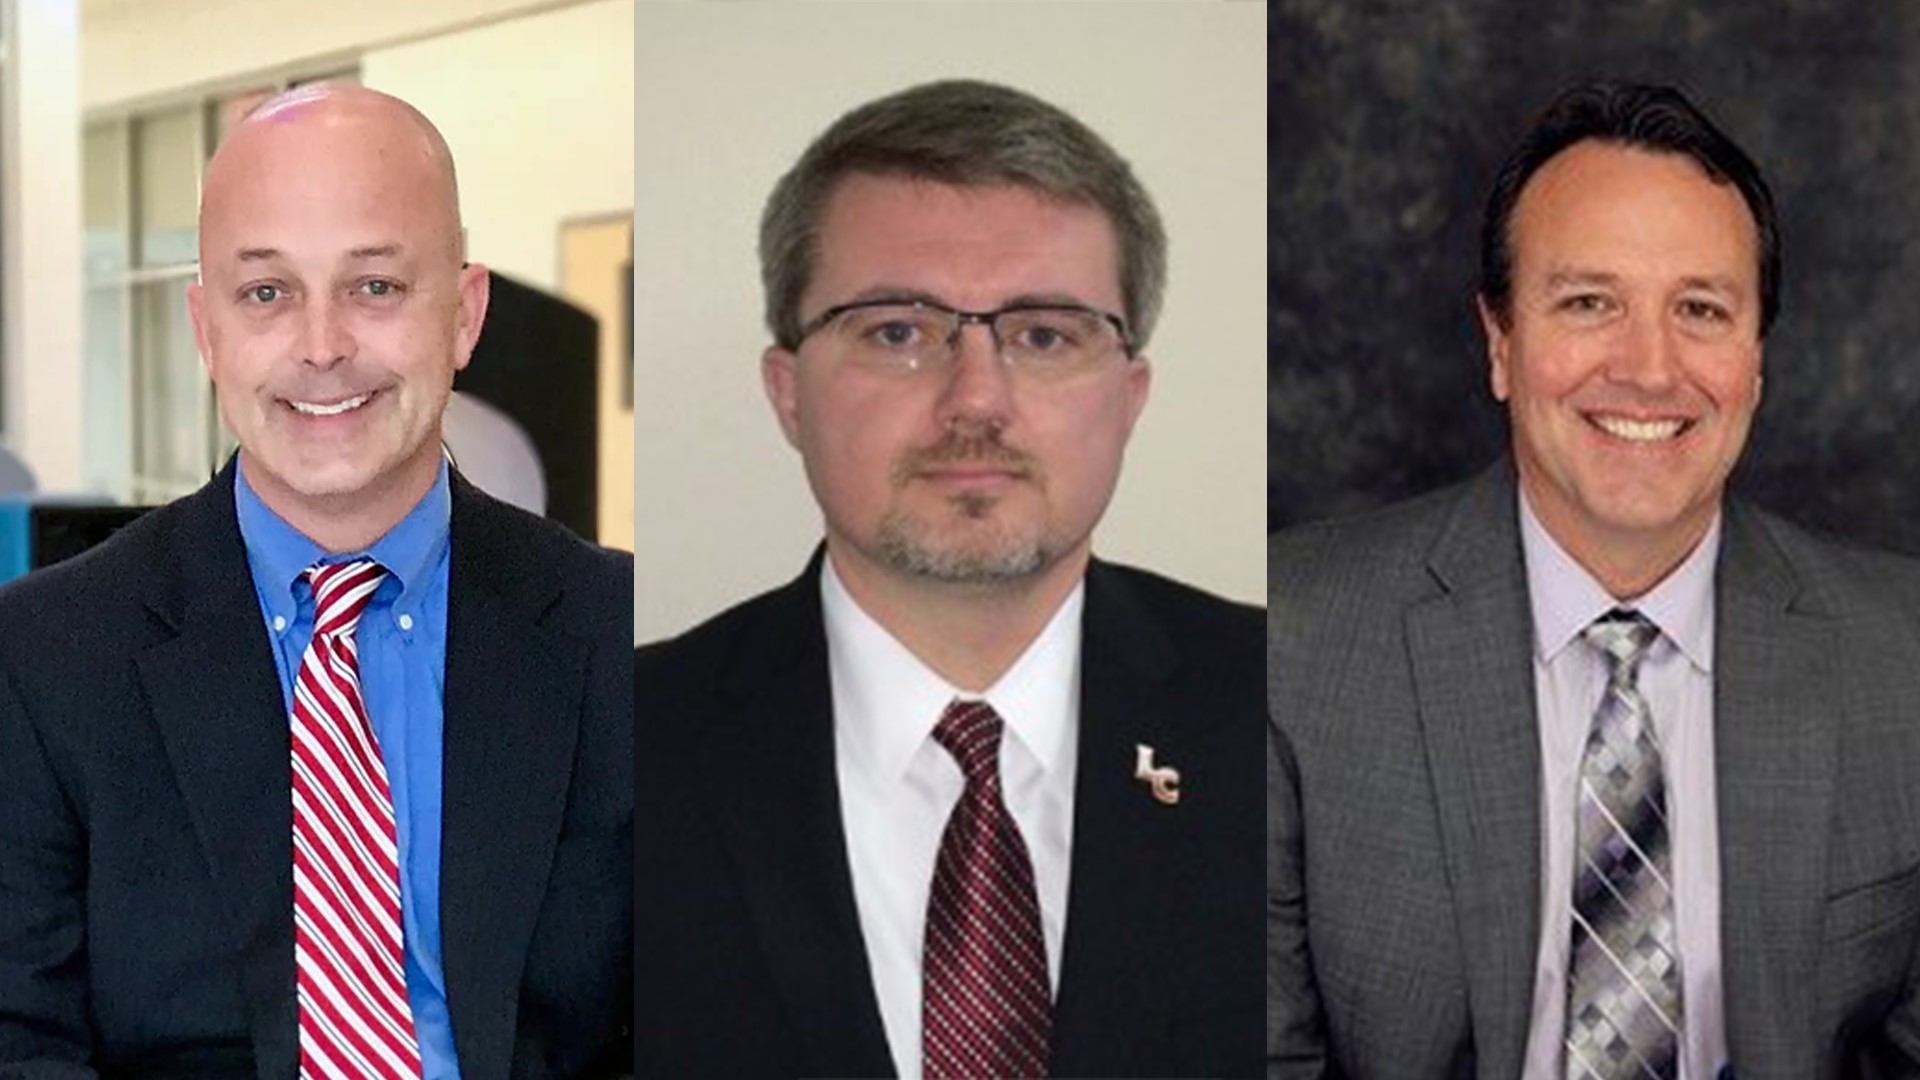 The Kentucky Board of Education announced three finalists looking to become Kentucky's next Commissioner of Education.